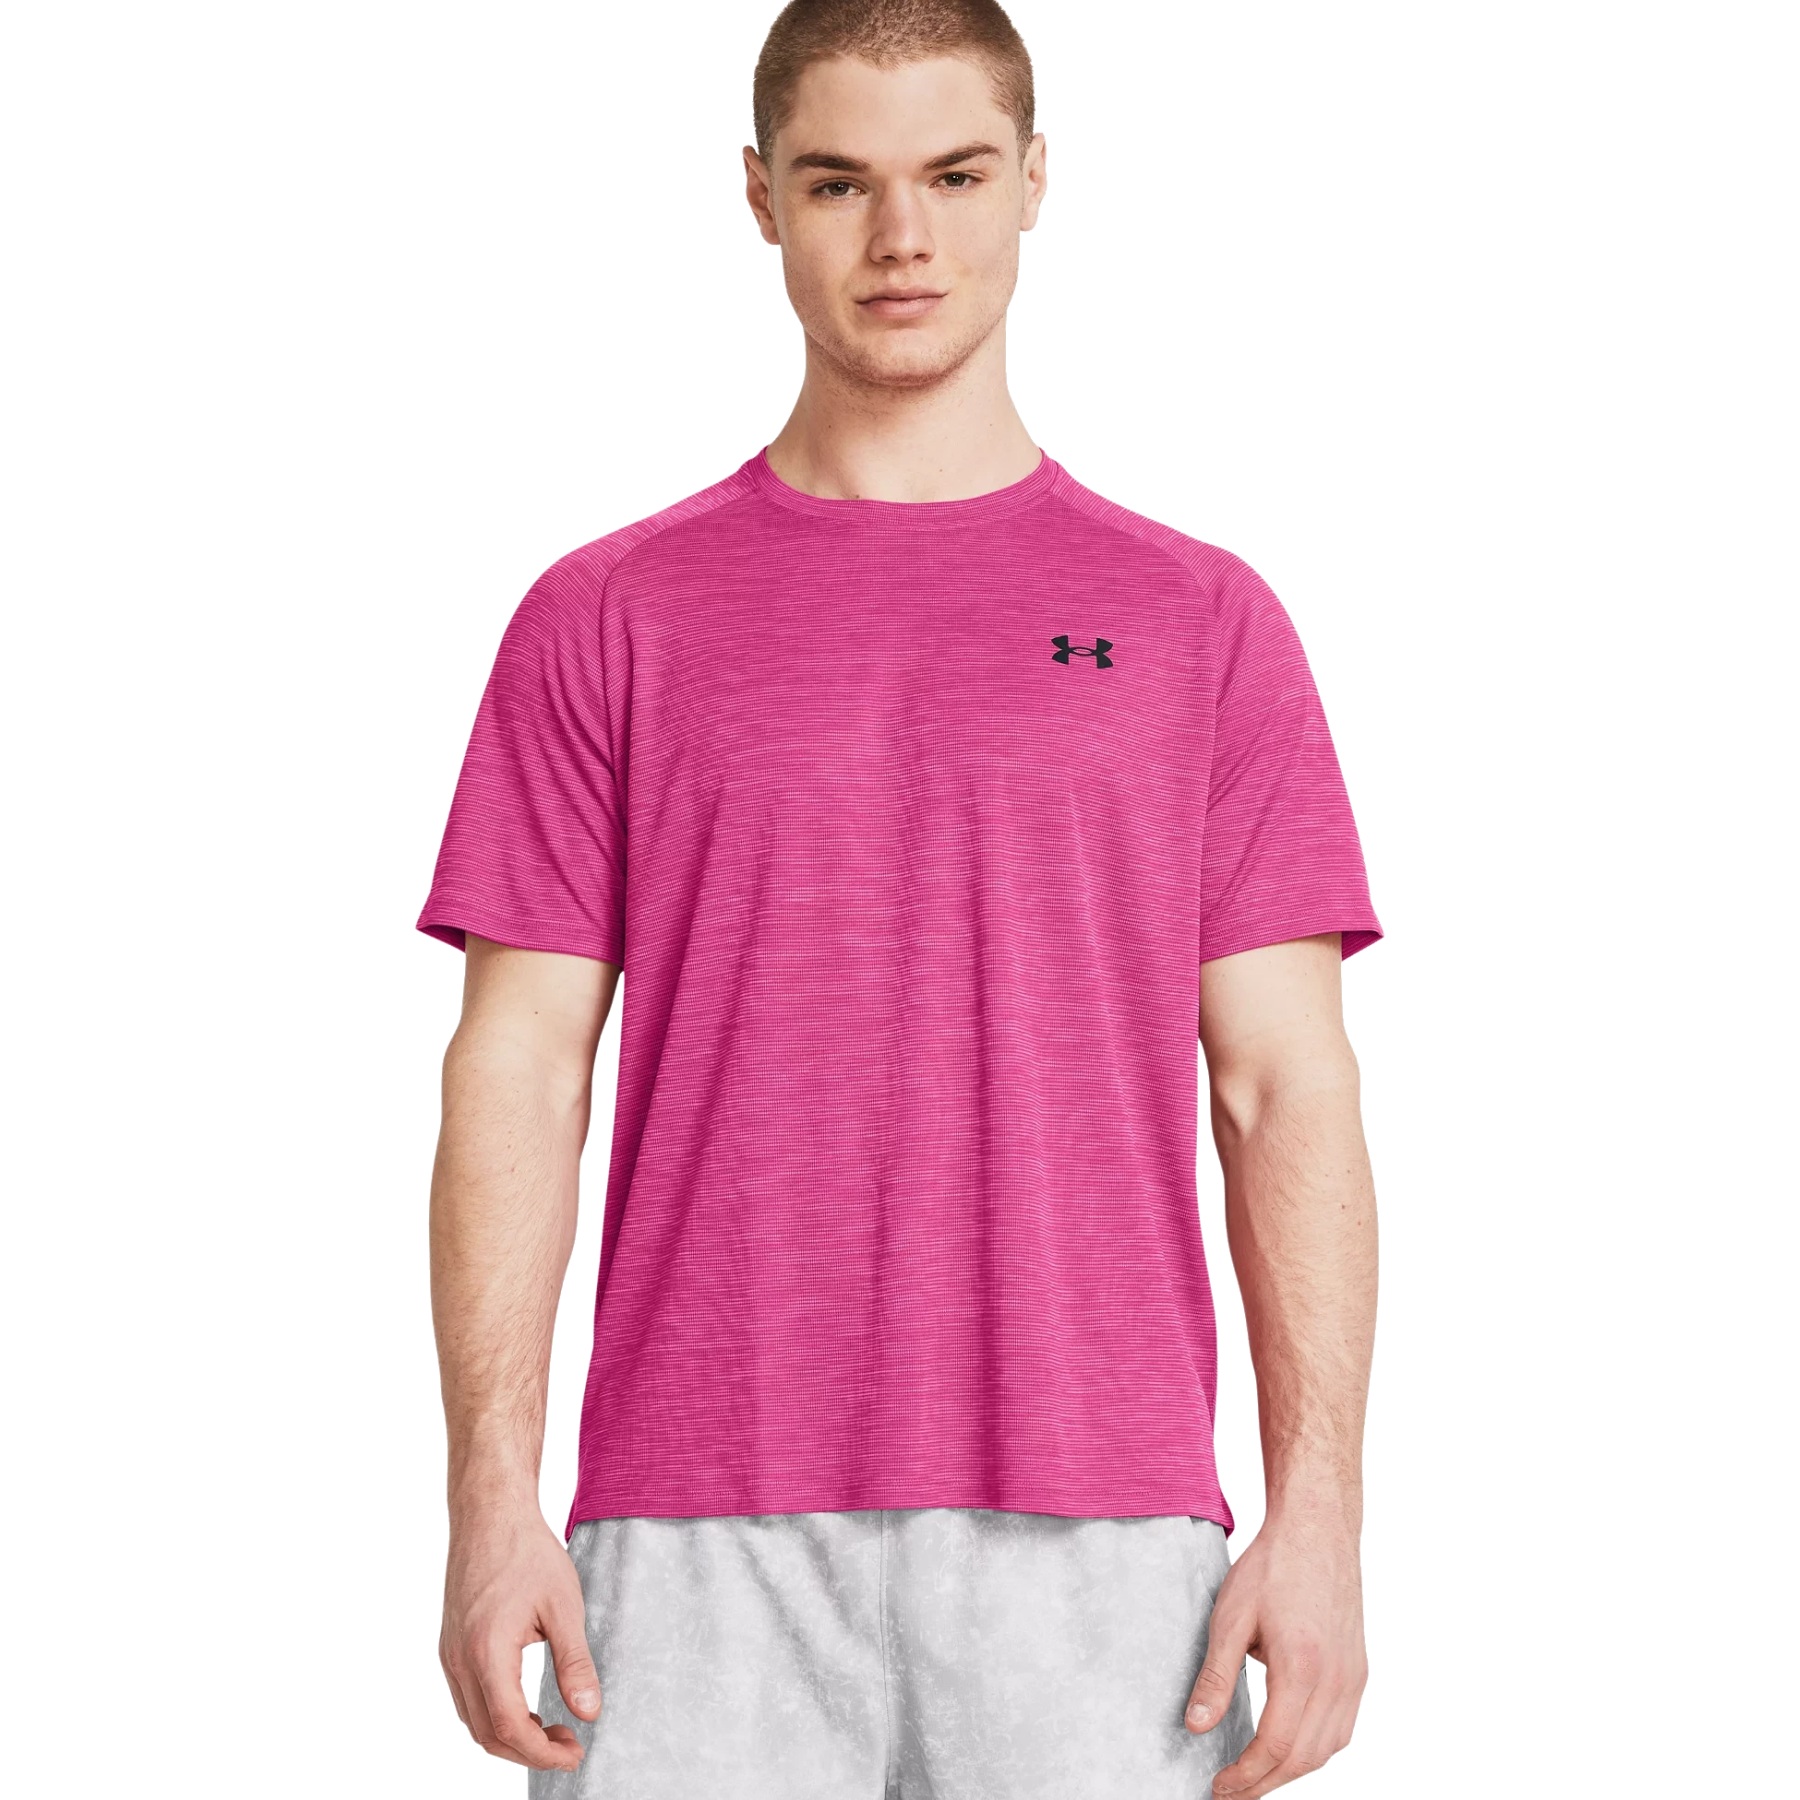 Picture of Under Armour UA Tech™ Textured Short Sleeve Shirt Men - Astro Pink/Black